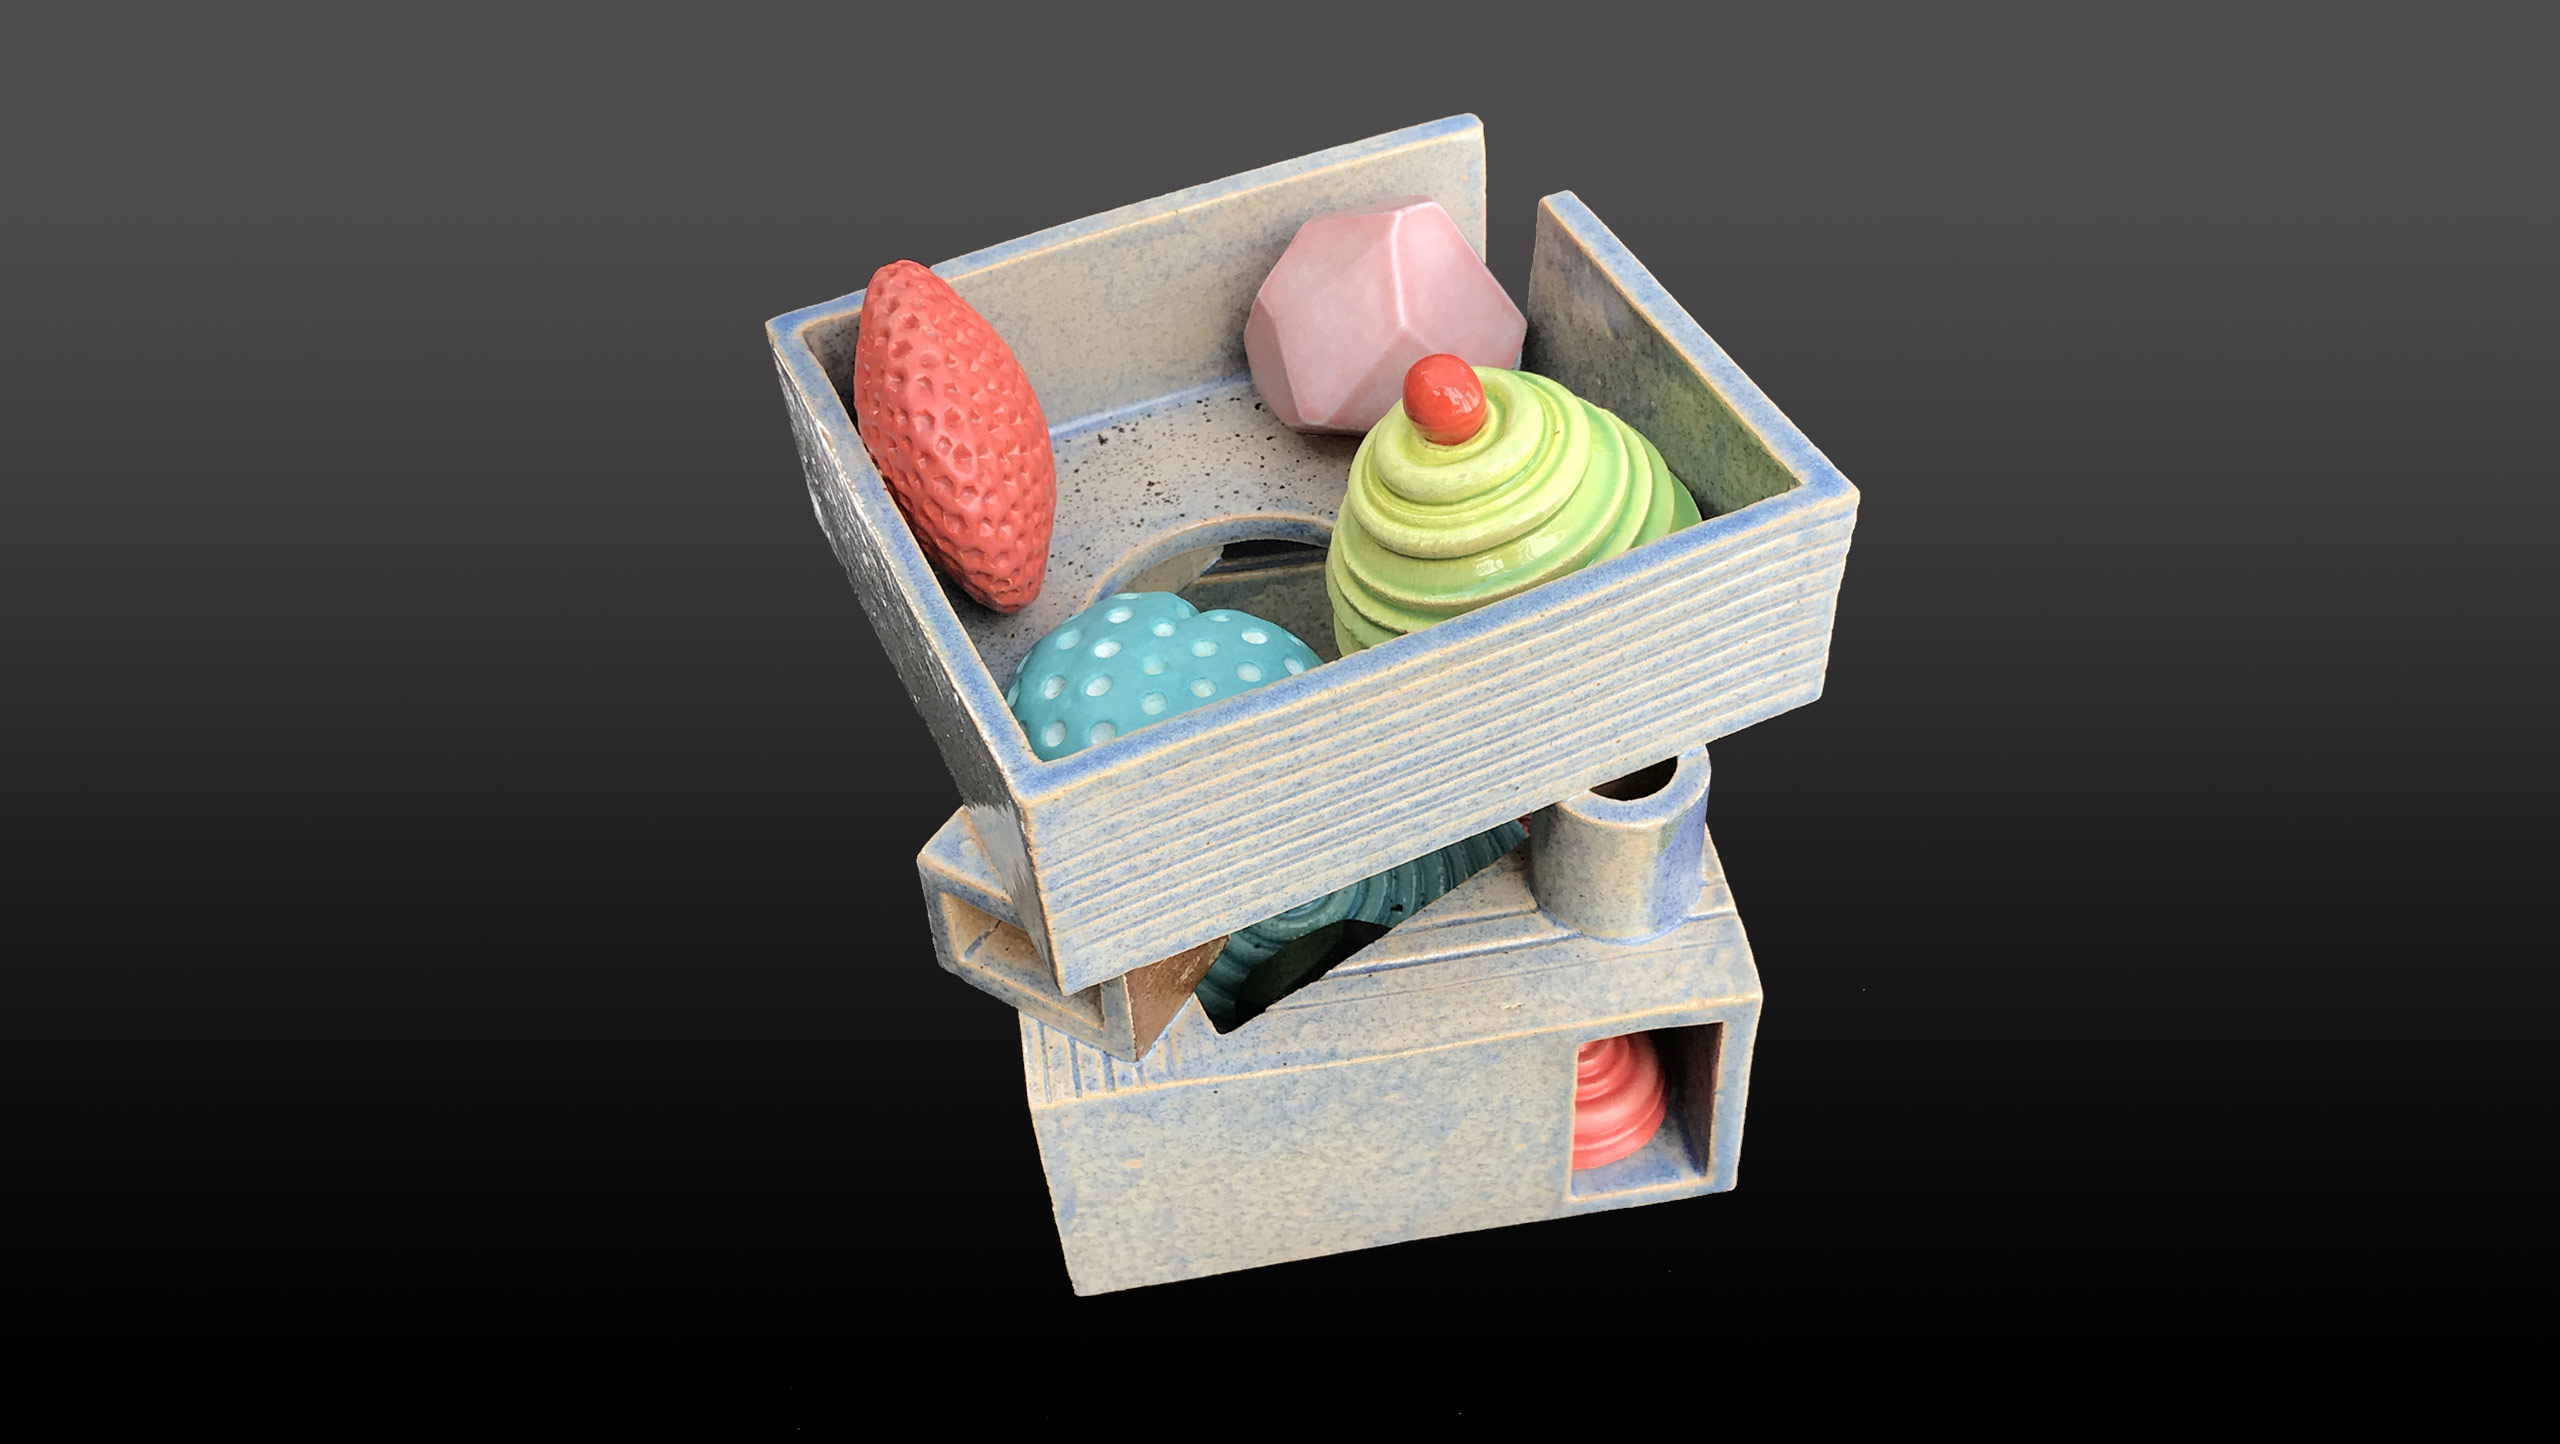 BauWauHaus - a ceramic still-life. Brightly glazed candy-like forms sit in an articulated 'open-plan' grey box on two layers supported on small geometric forms. The two layers are pierced by small rectangular and circular openings